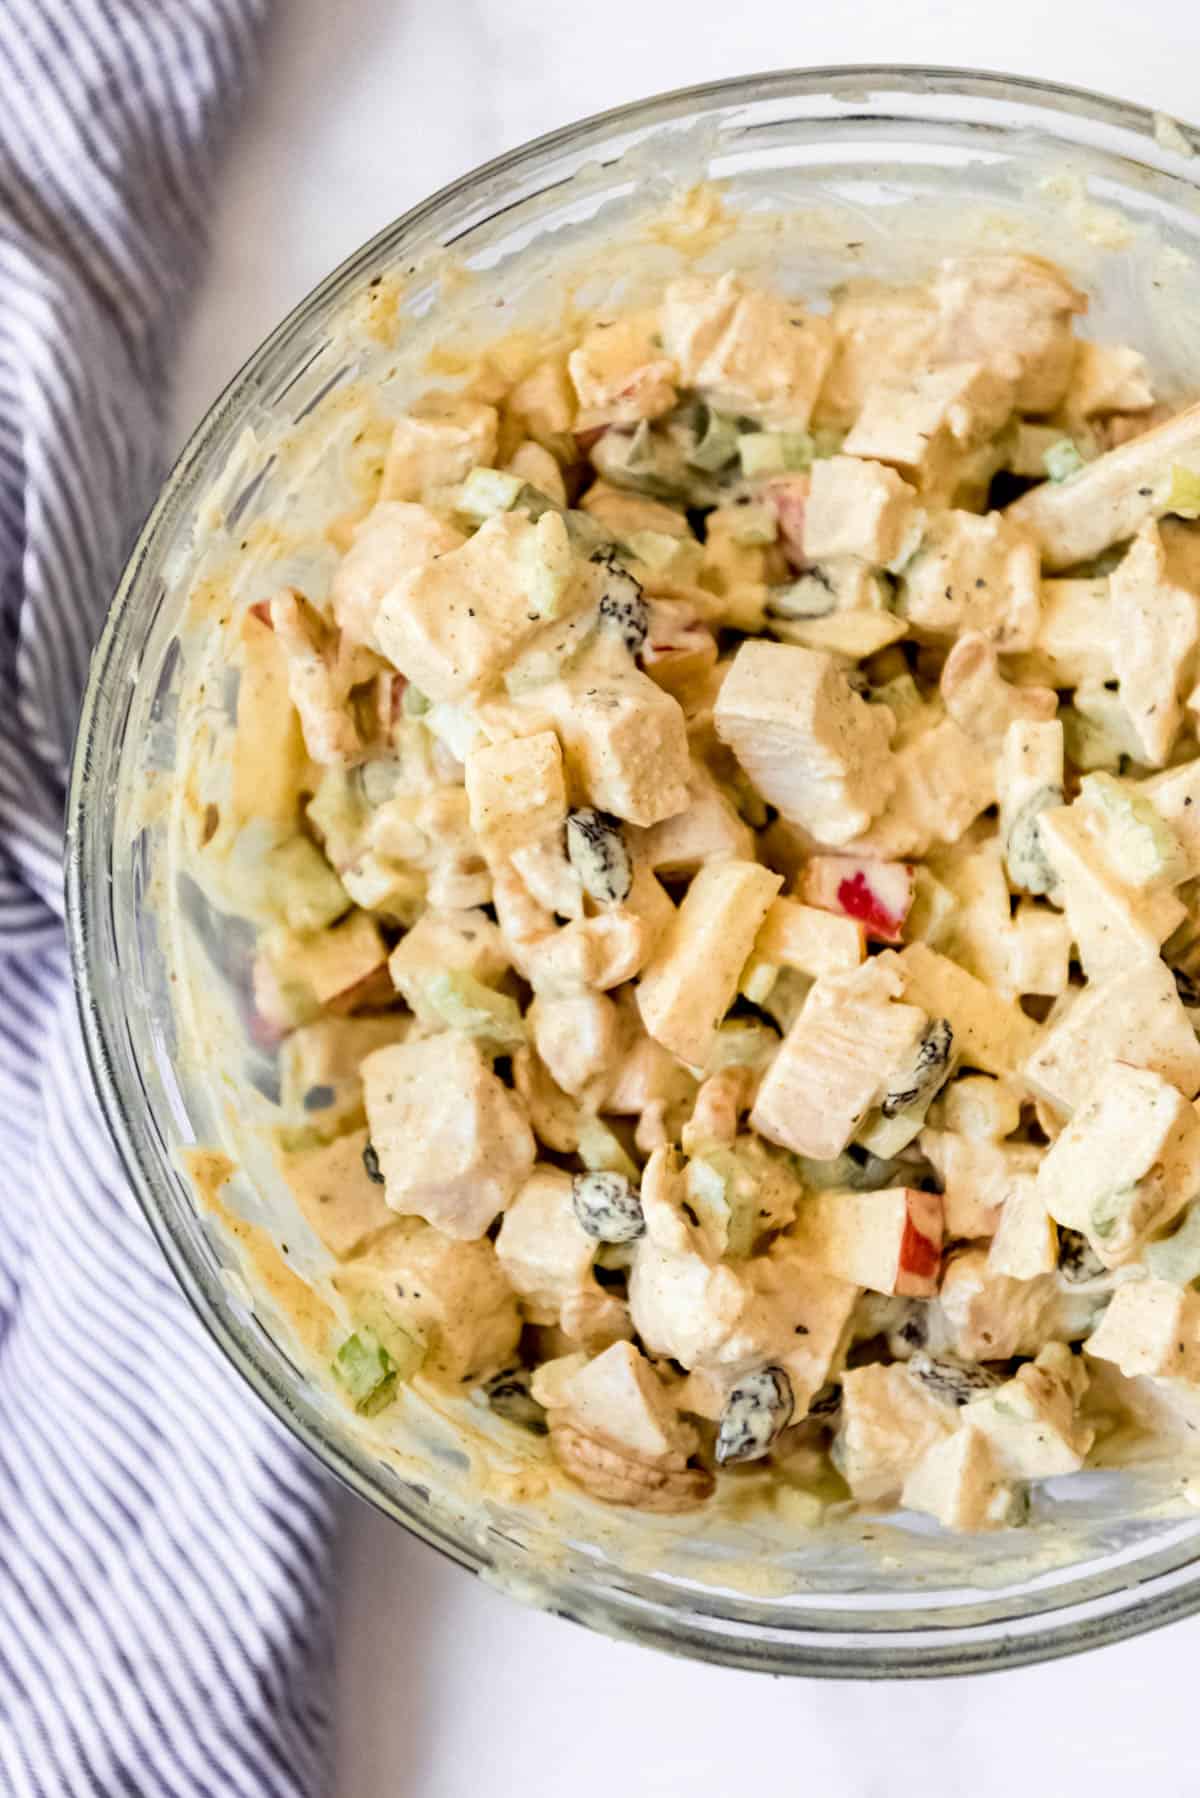 Overhead view of curried chicken salad in glass mixing bowl.